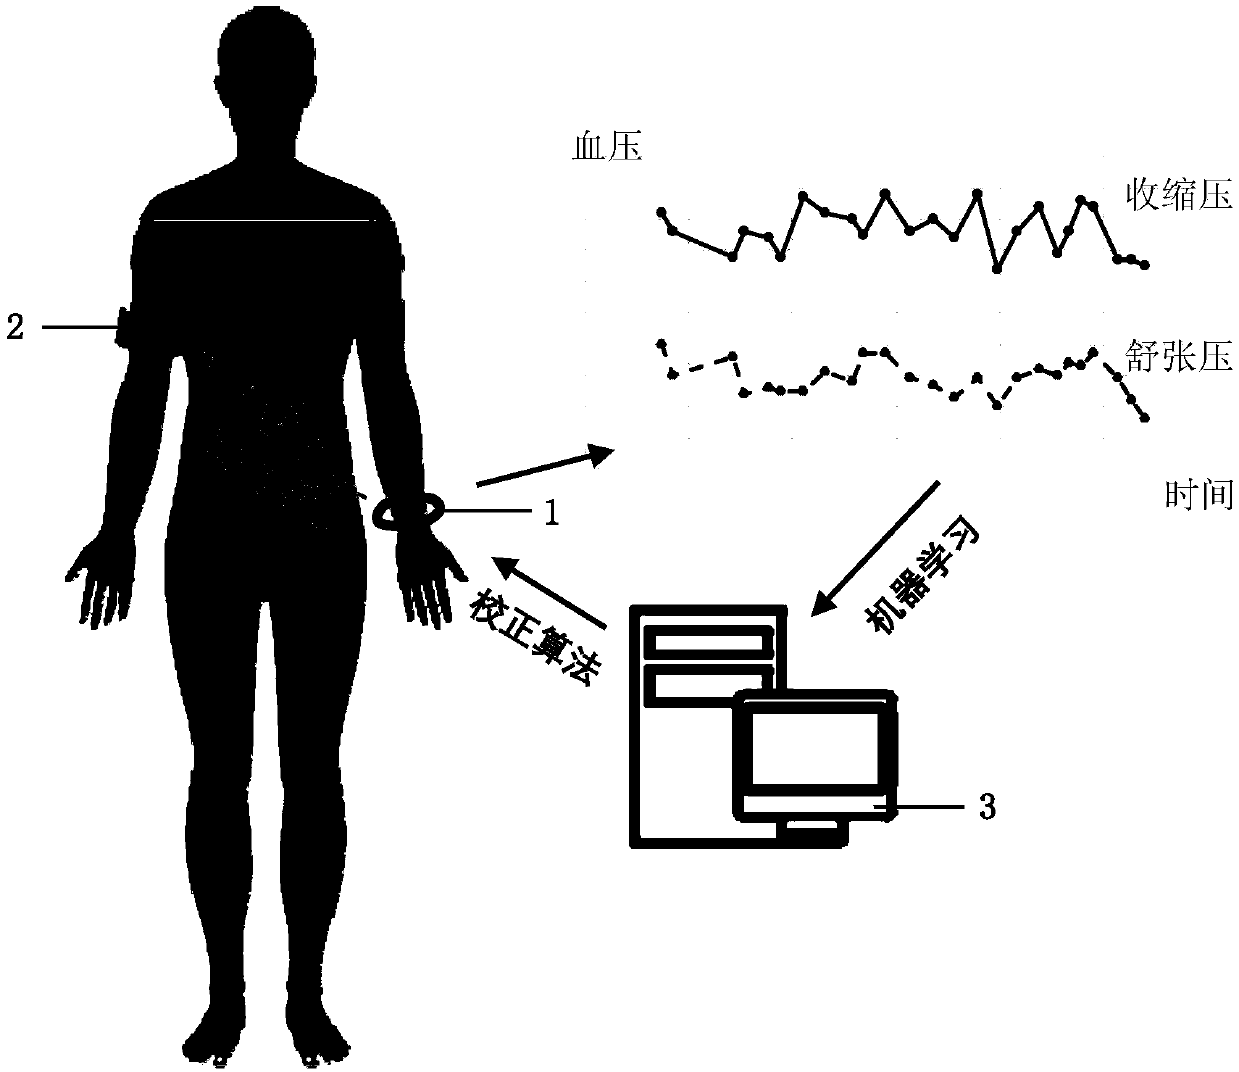 Wearable high blood pressure real-time diagnosis and treatment integrated system with controllable drug release